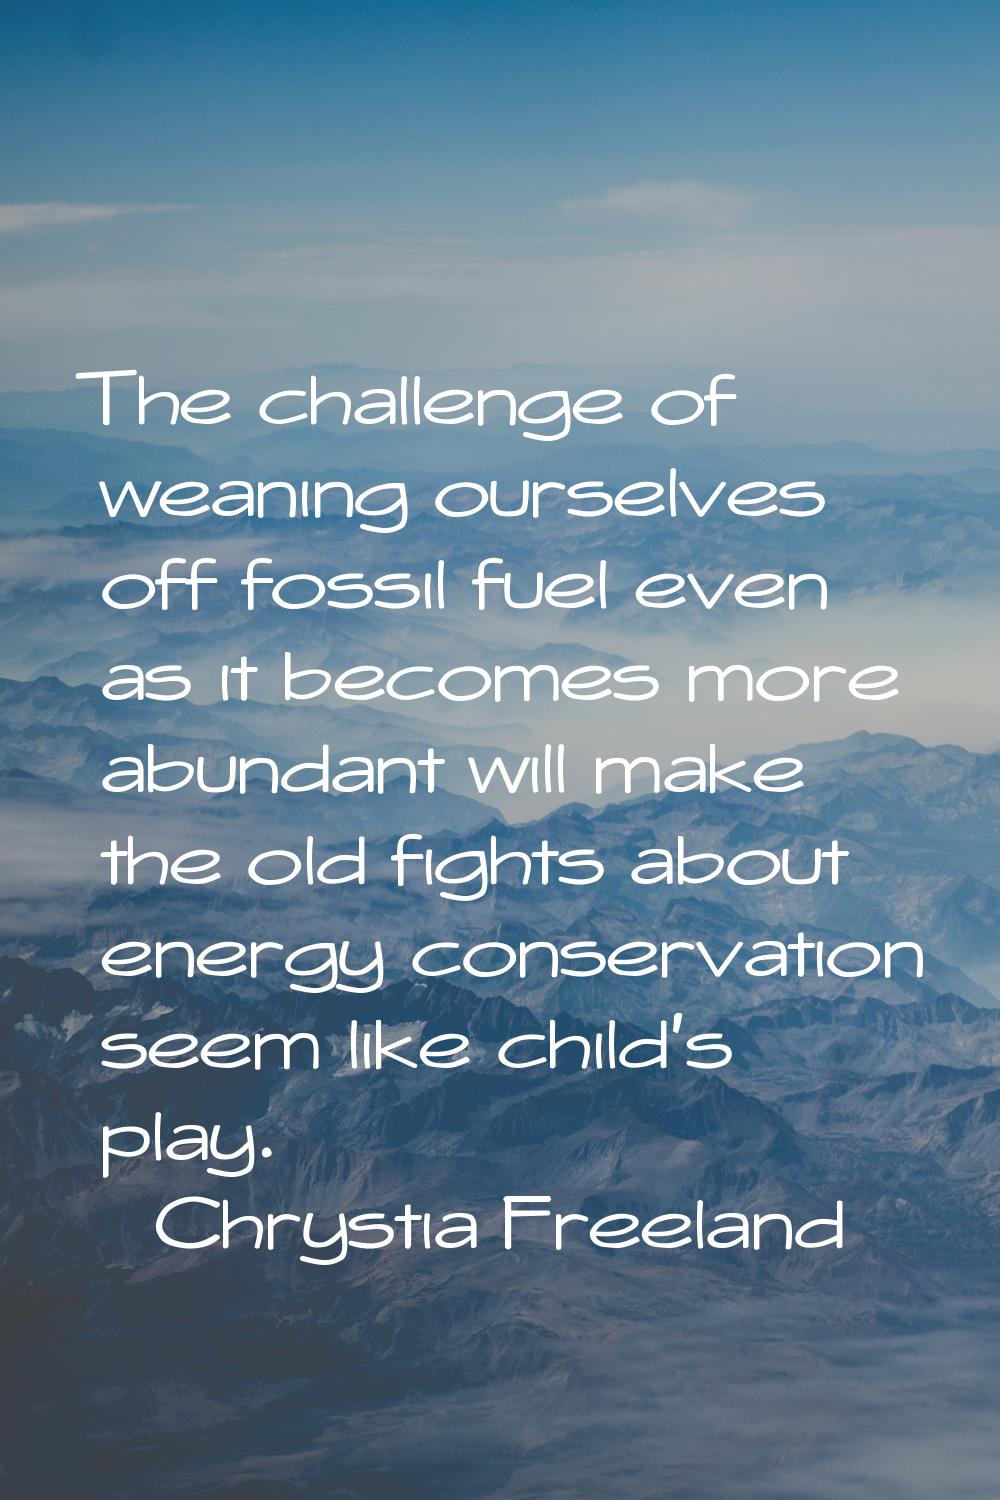 The challenge of weaning ourselves off fossil fuel even as it becomes more abundant will make the o